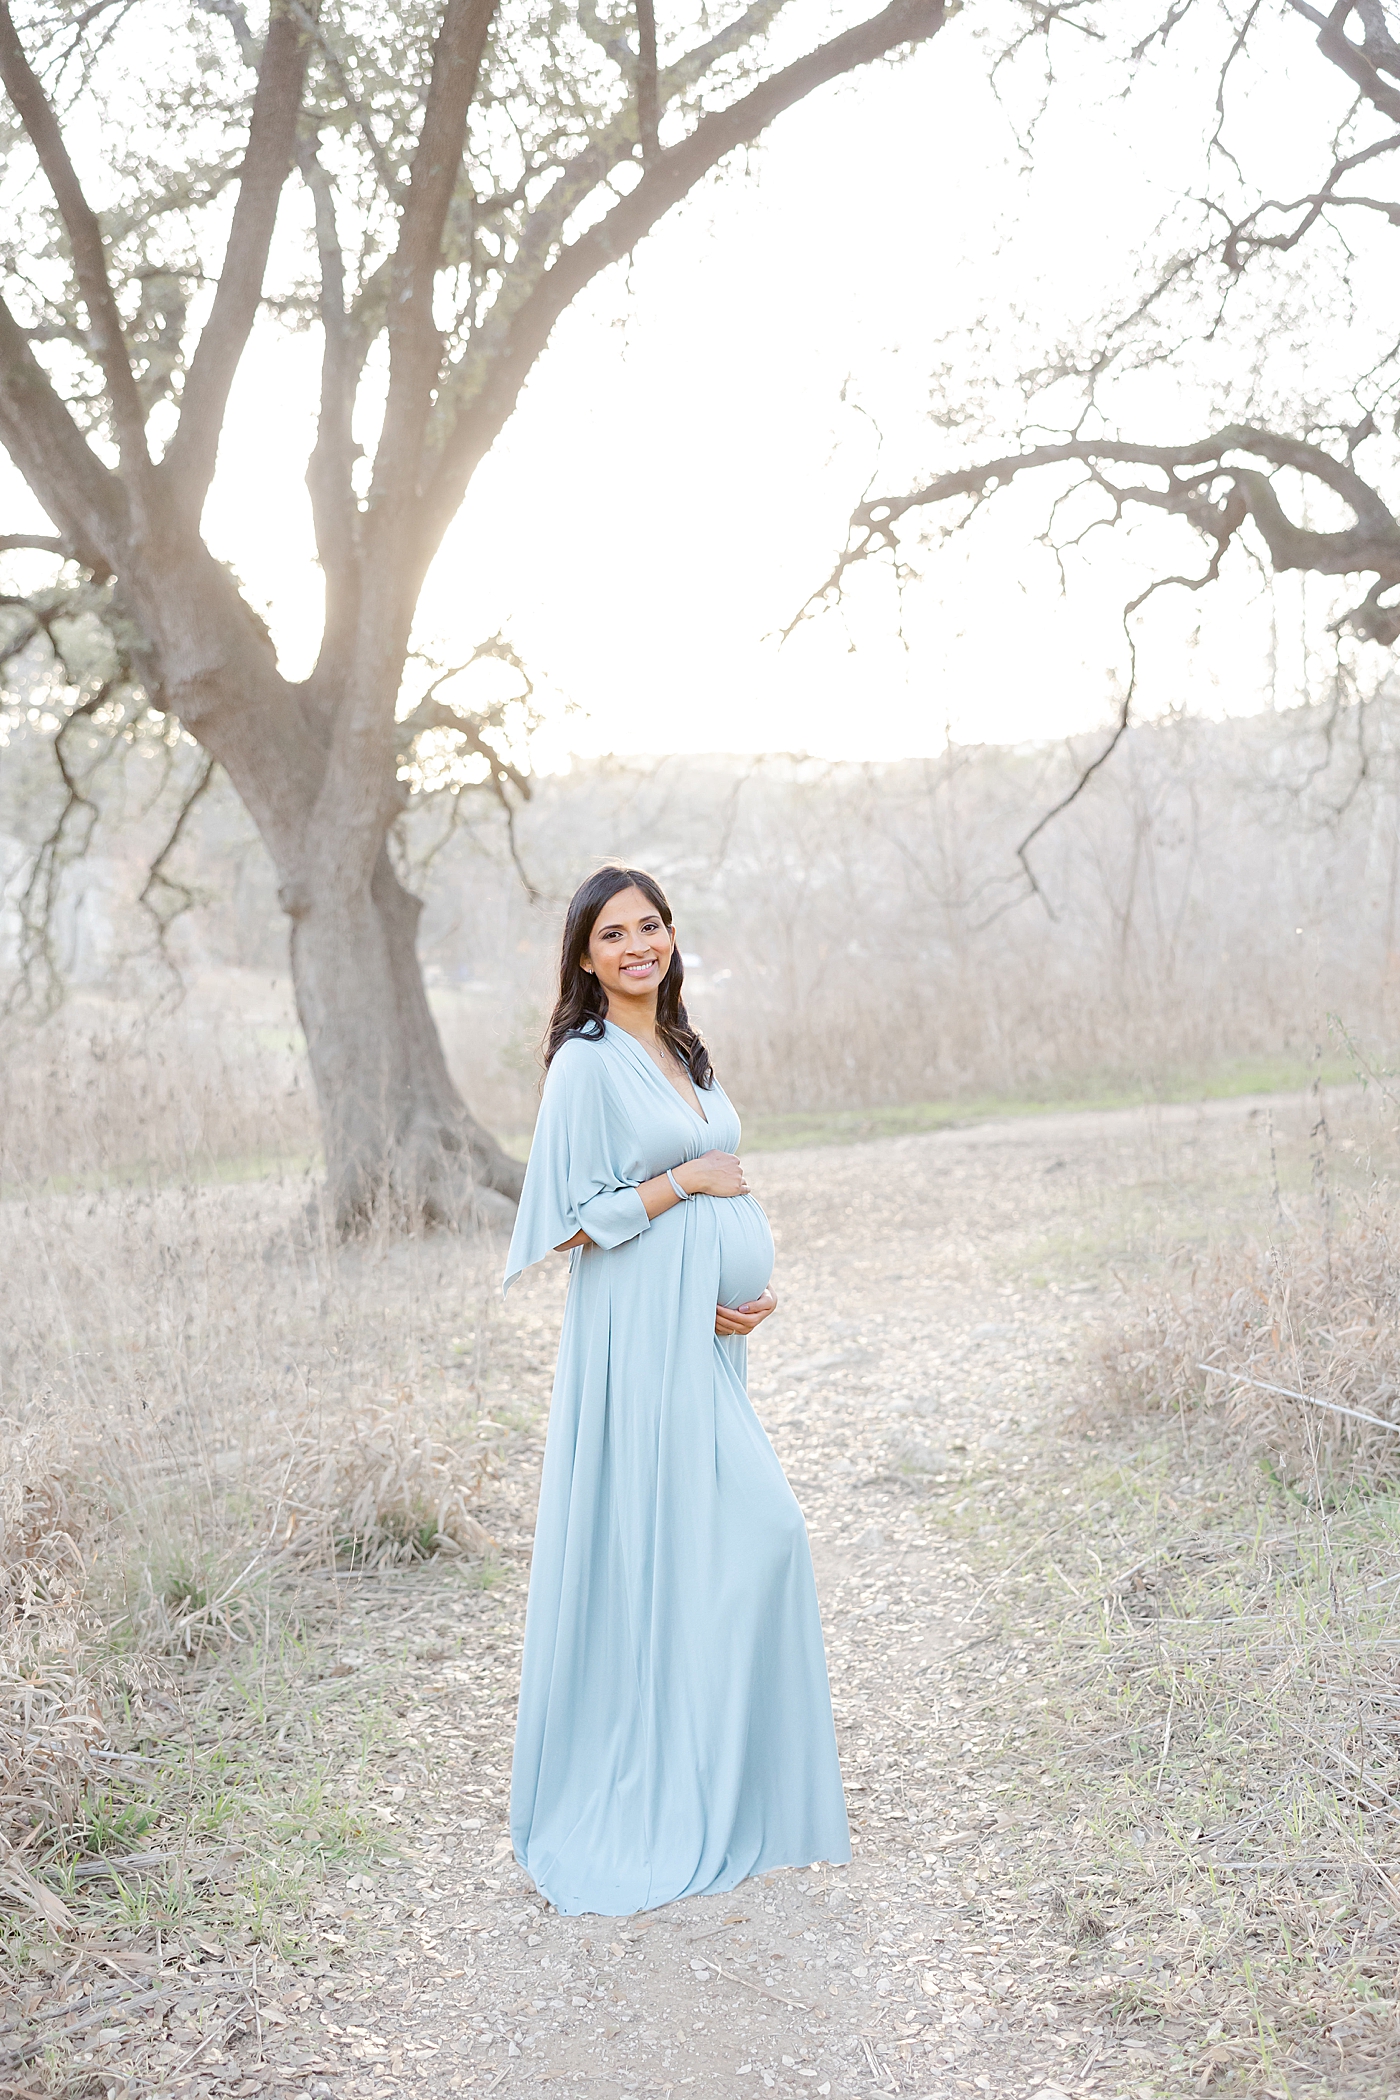 Mom to be in a blue dress holding her belly | Images by Sana Ahmed 